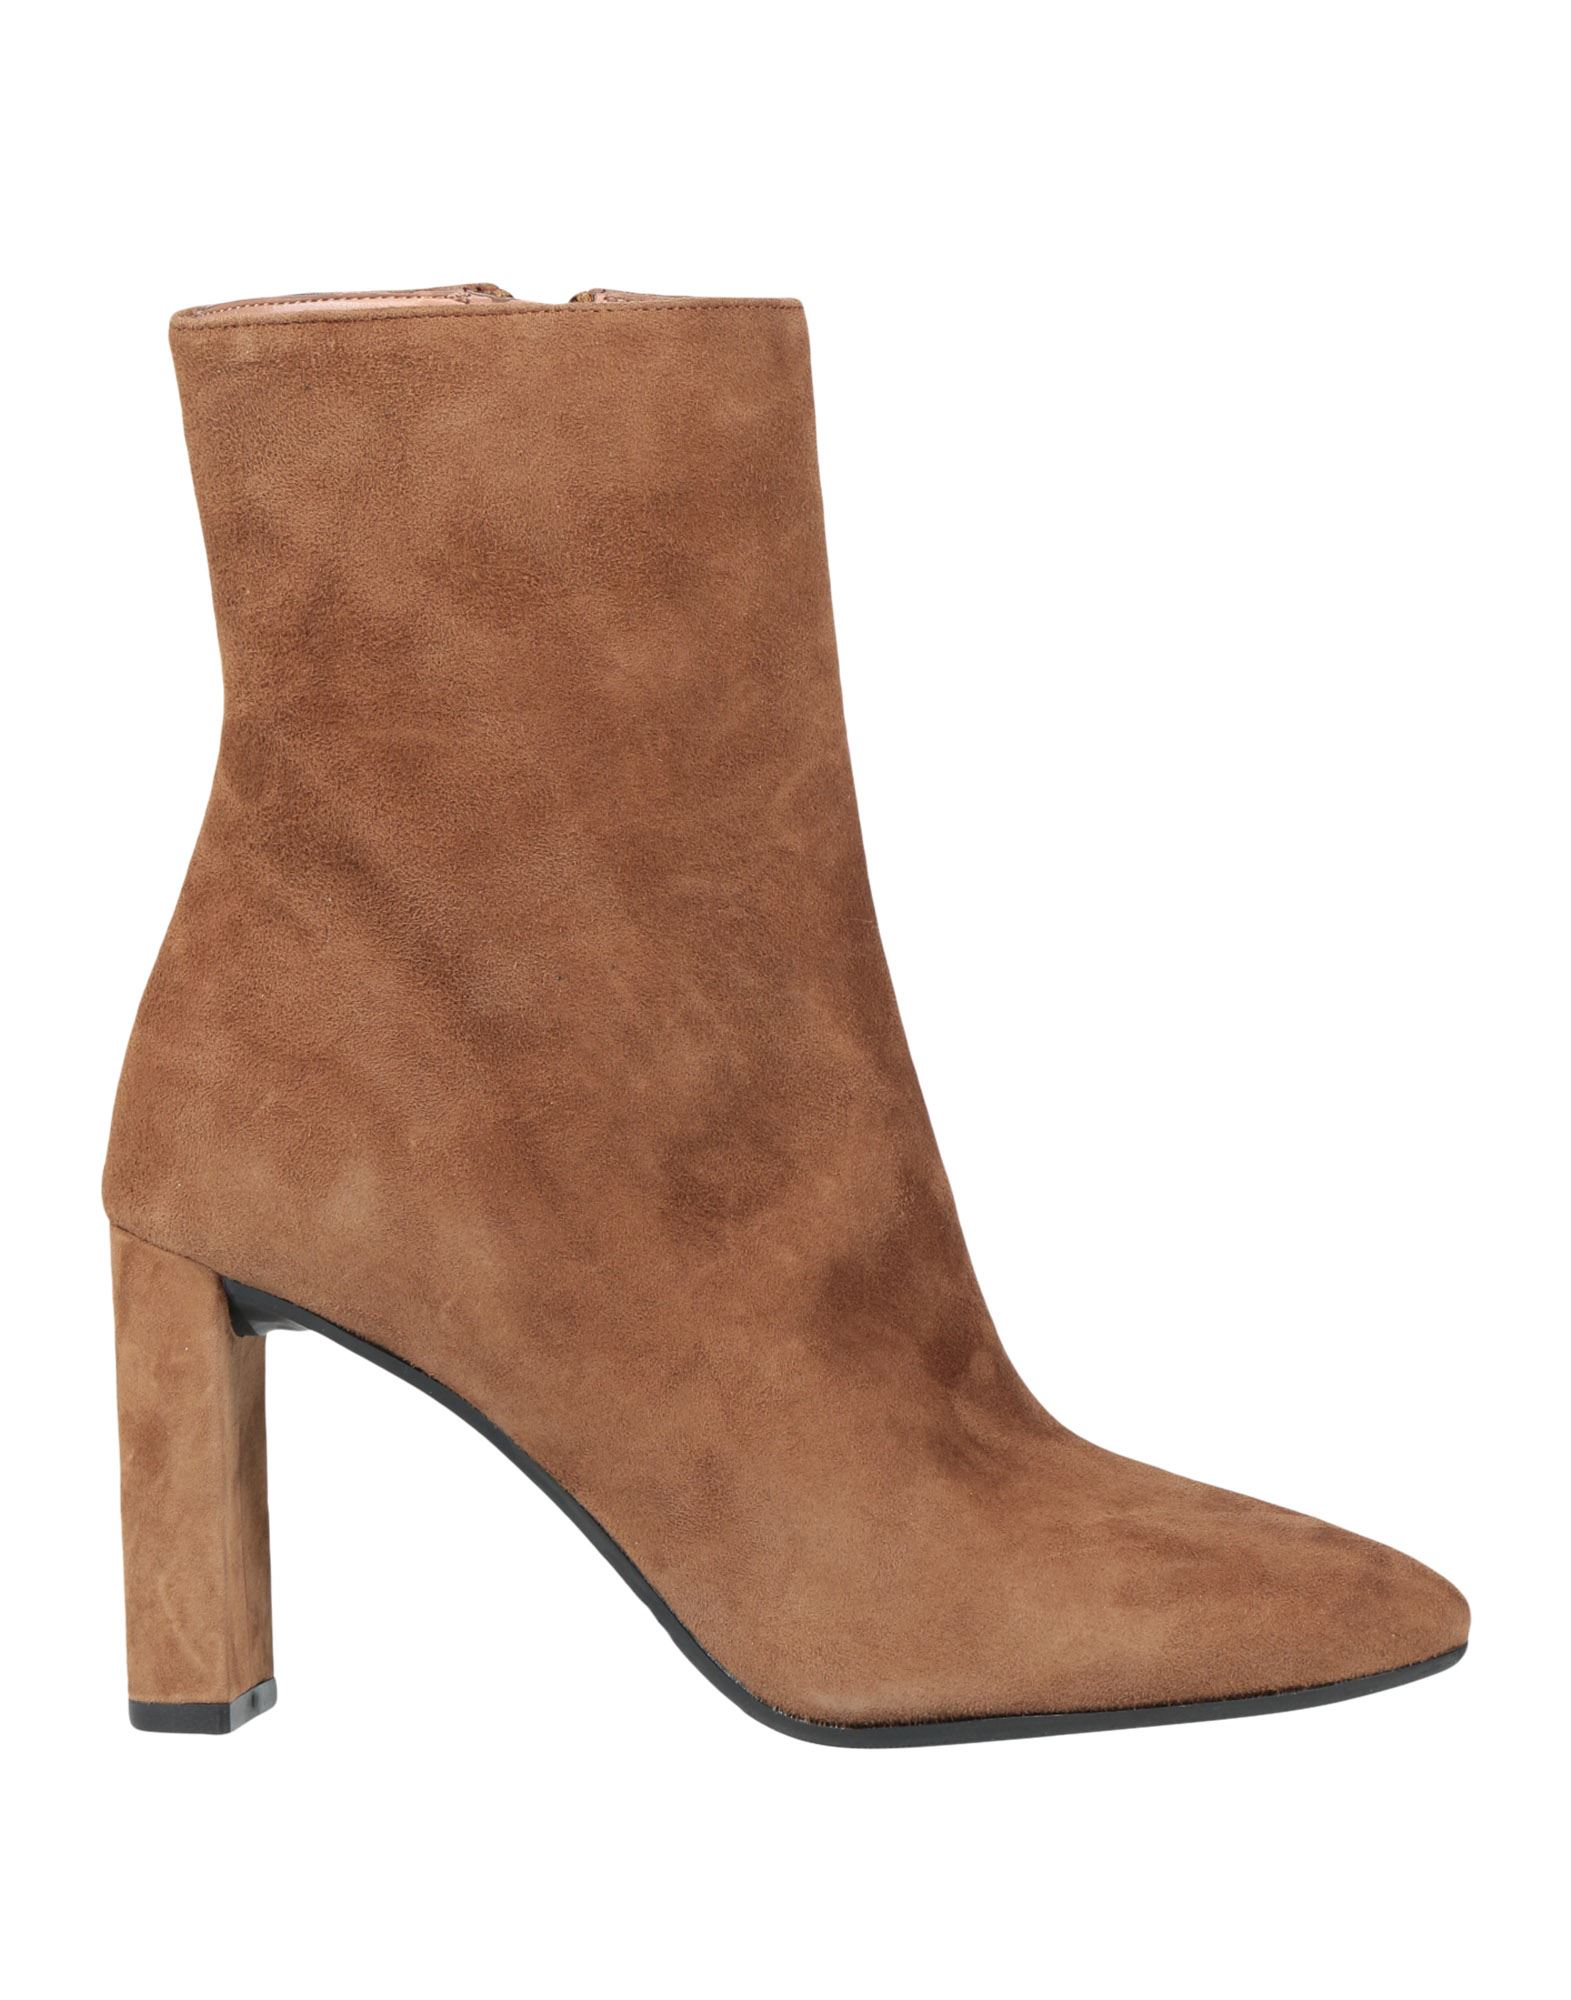 BIANCA DI ANKLE BOOTS